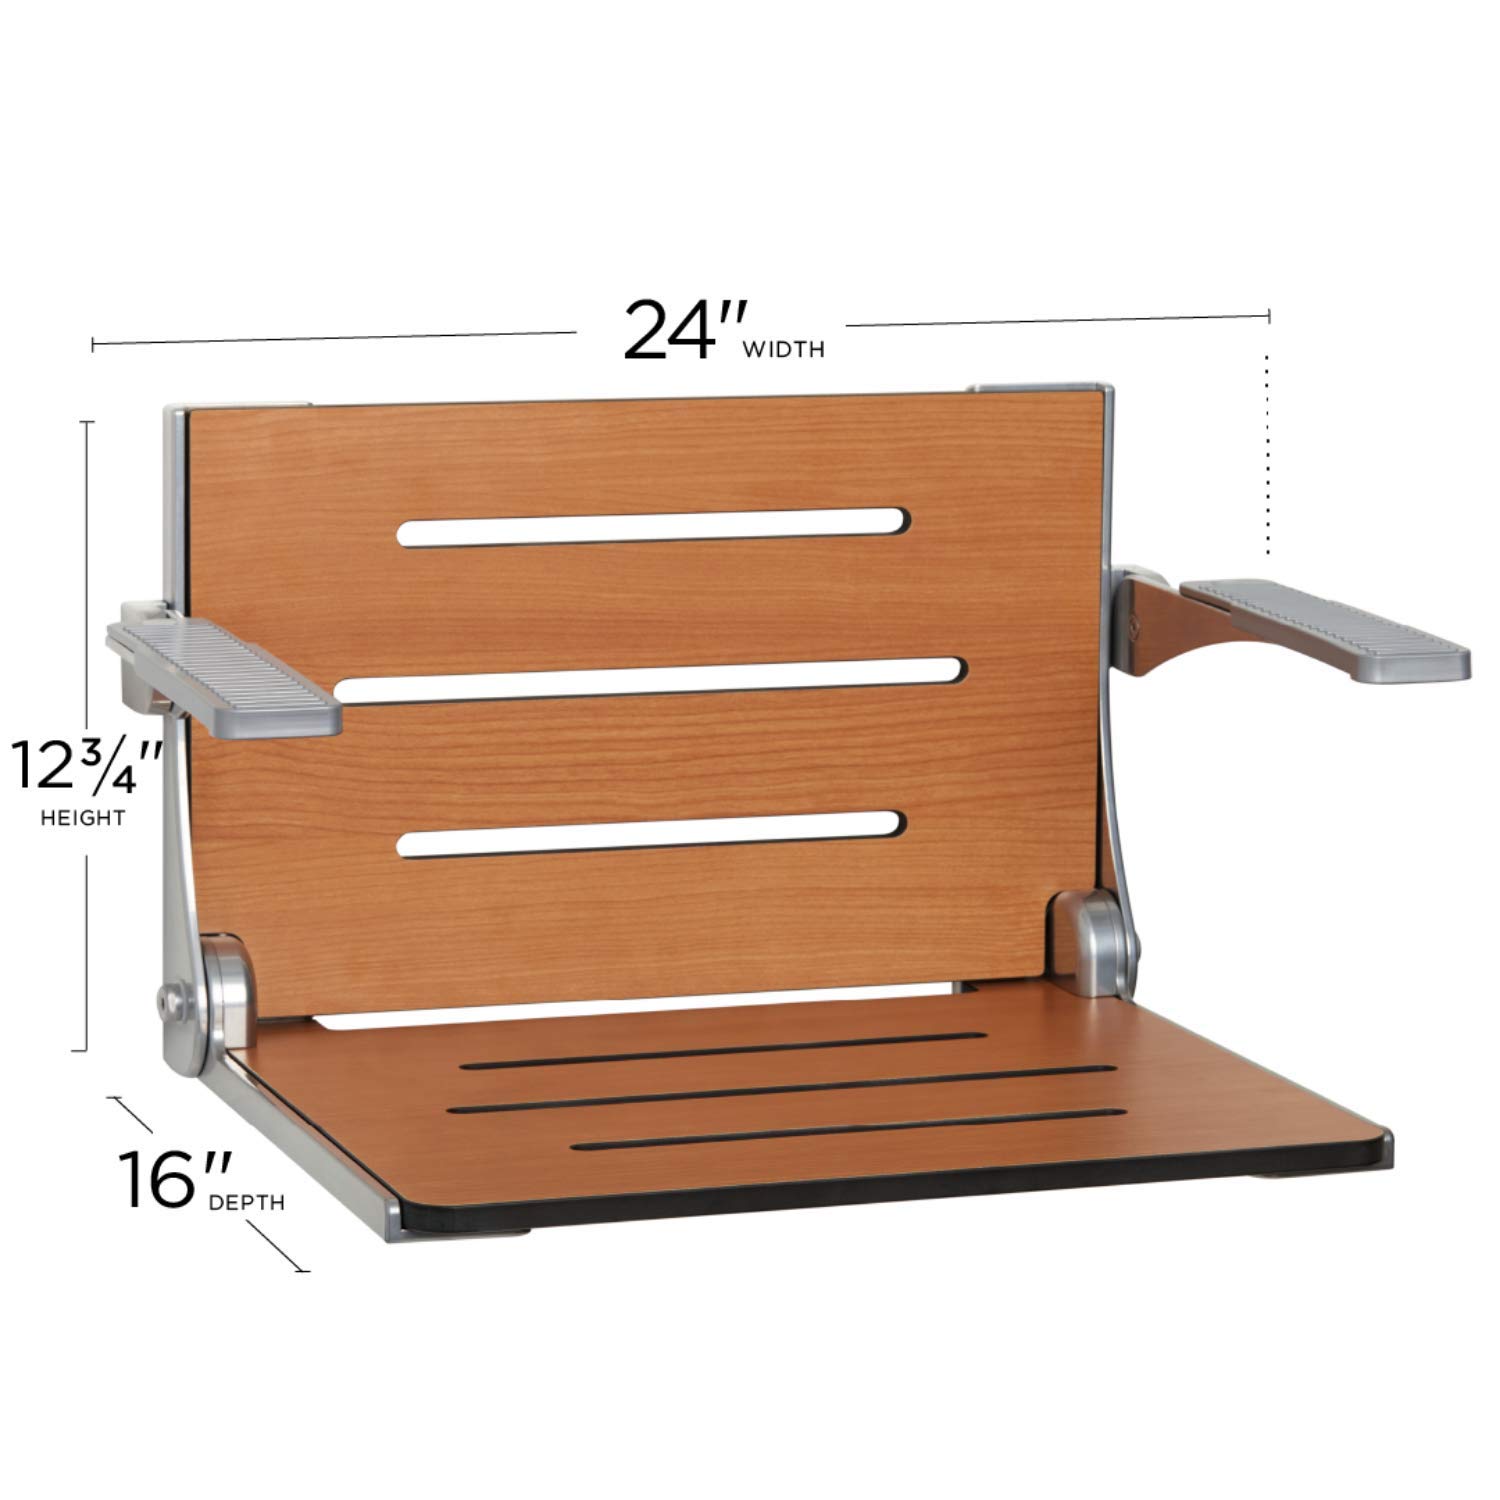 Seachrome Silhouette Comfort Folding Wall Mount Shower Bench Seat with Arms, Teak Seat with Silver Frame